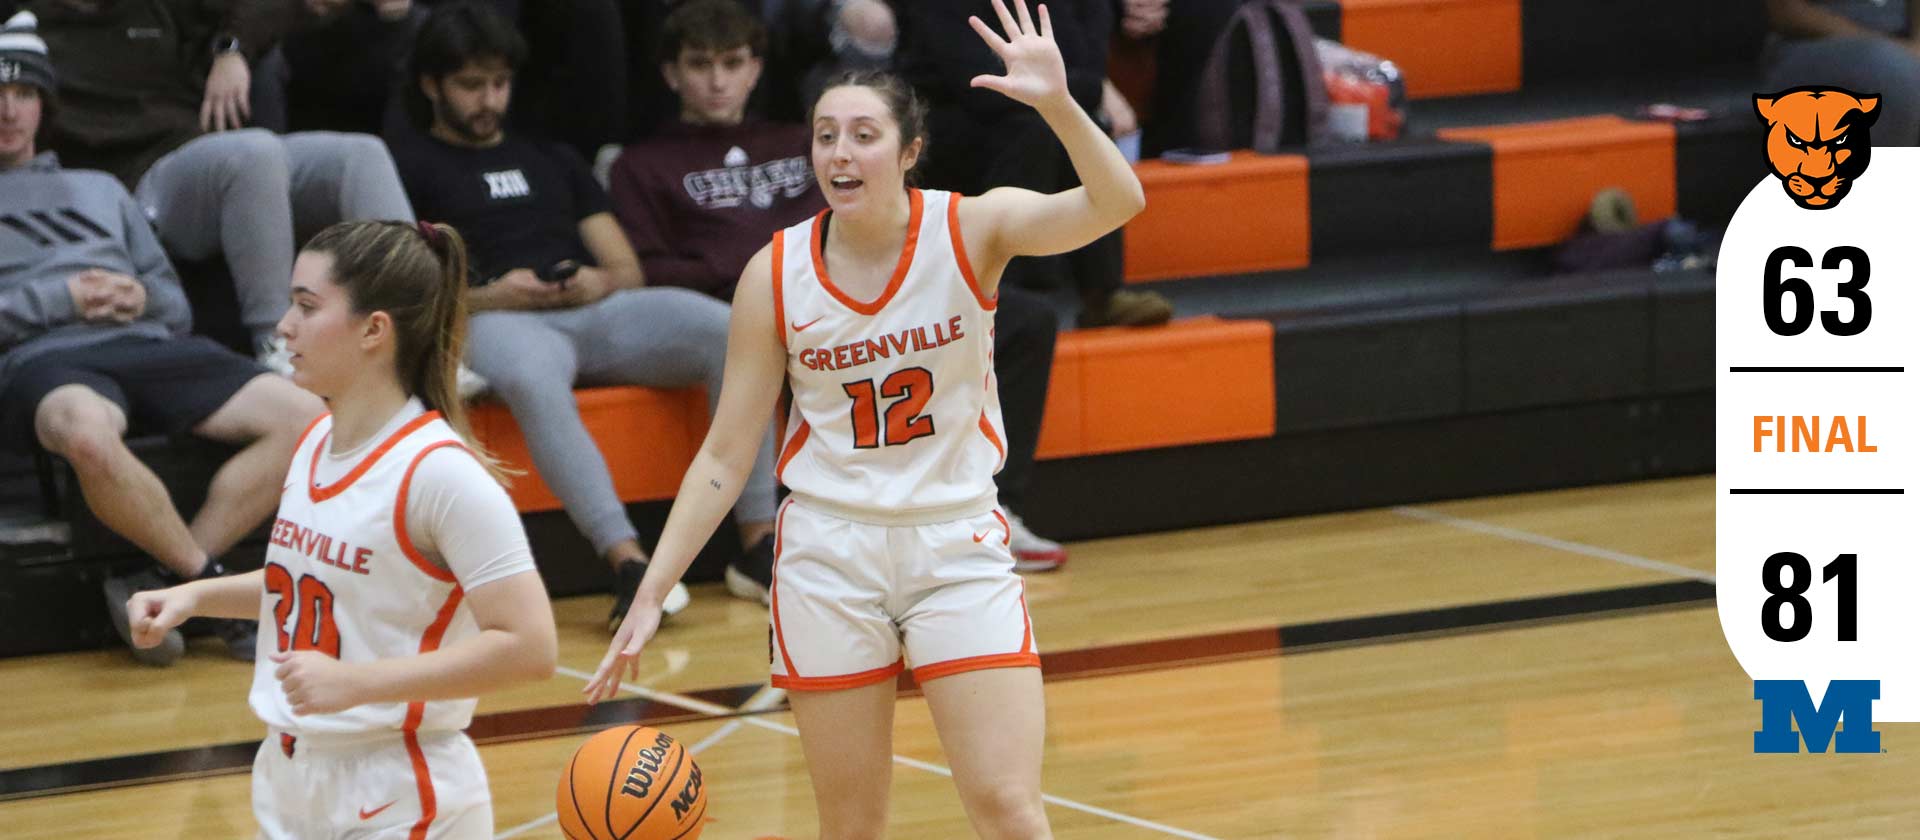 Women's basketball falls in 81-63 decision at Millikin